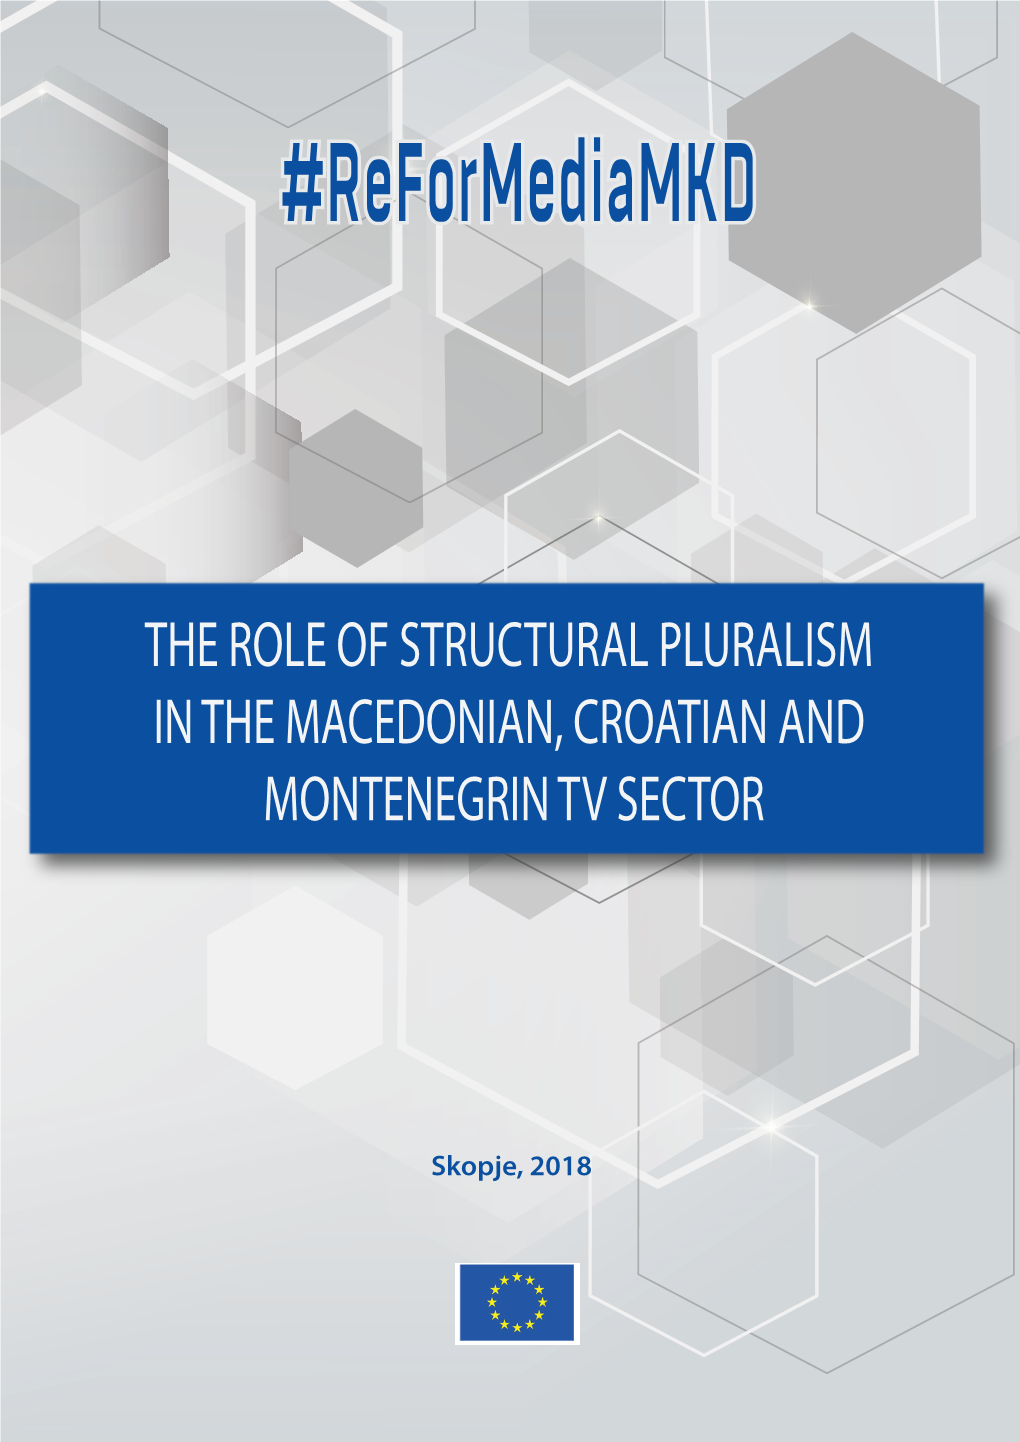 The Role of Structural Pluralism in the Macedonian, Croatian and Montenegrin Tv Sector